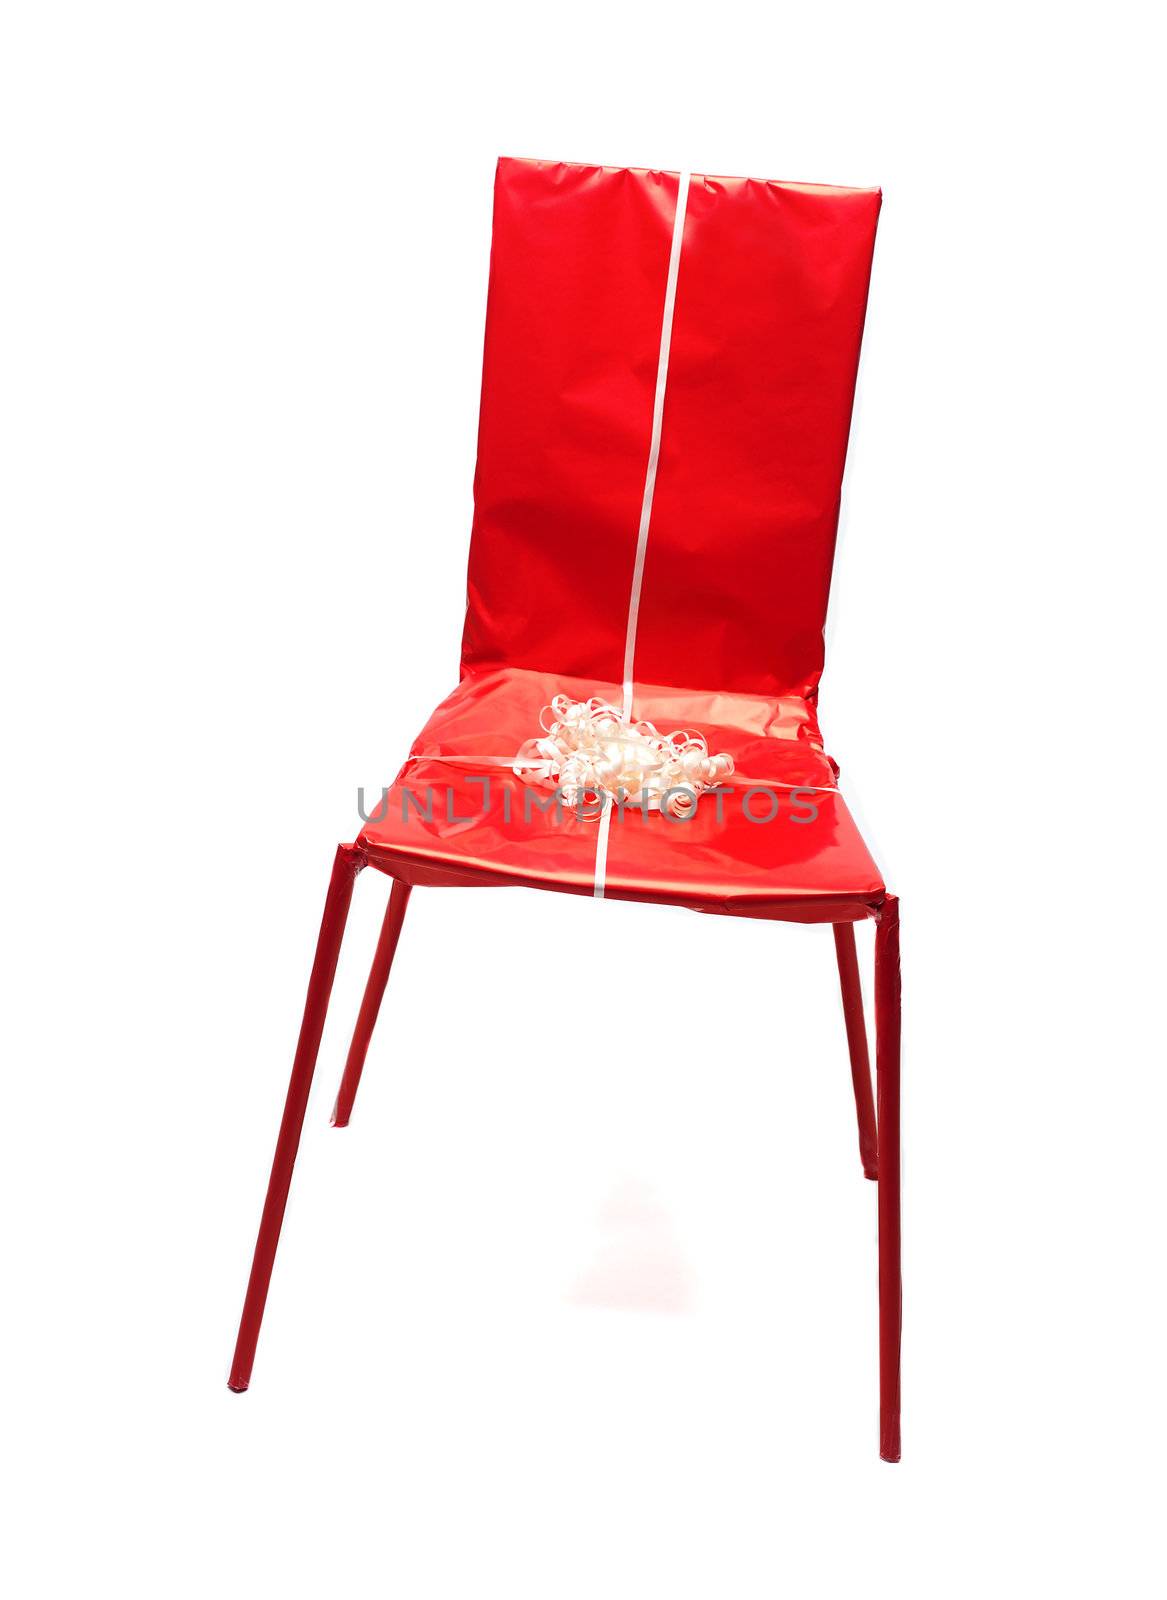 Wrapped in Chair on white background